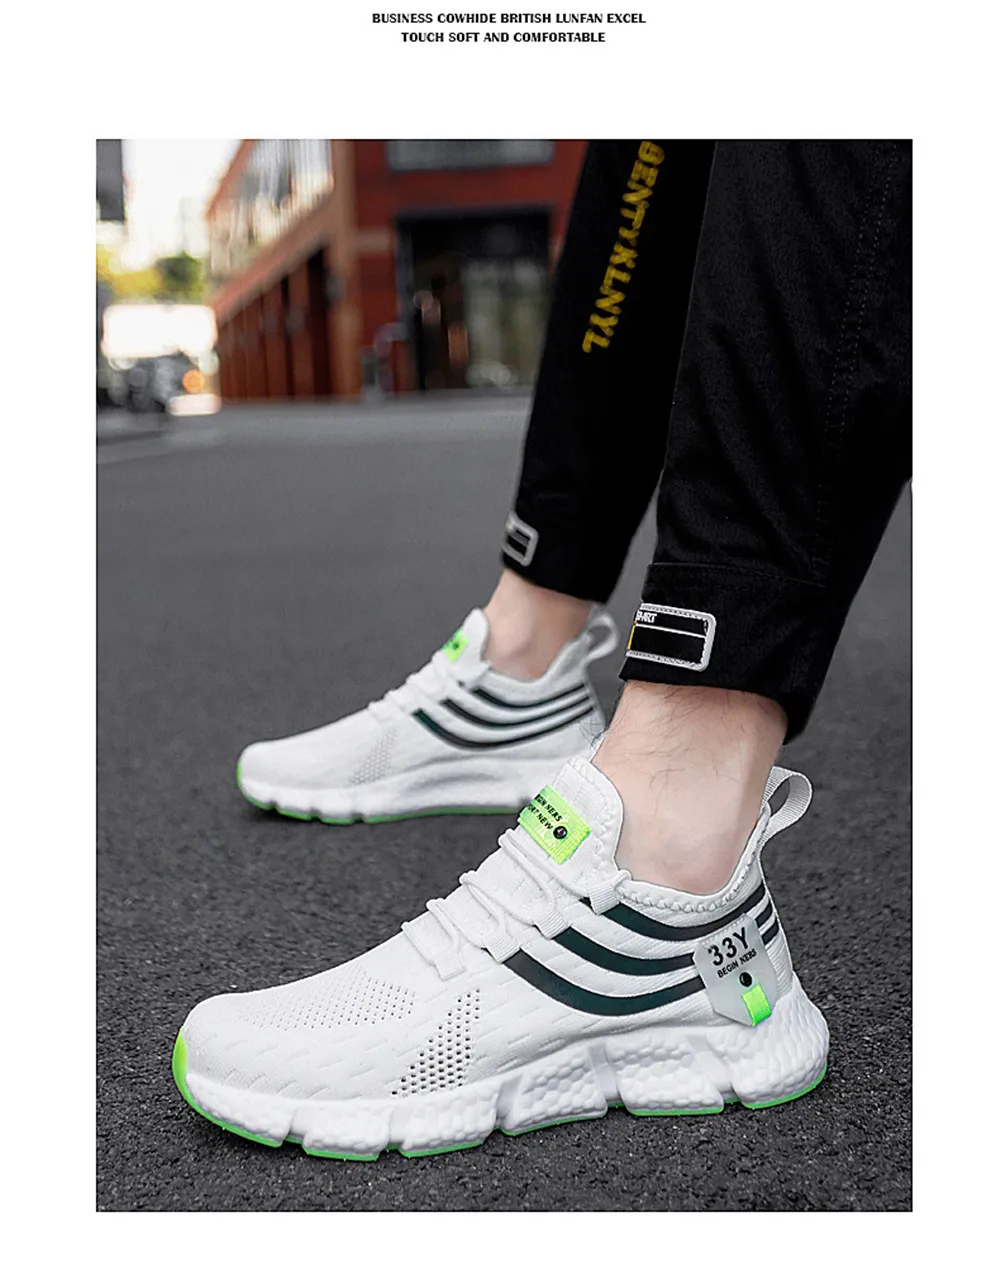 Men's Sneakers Mesh Breathable Running Shoes Male Light Non-slip Classic Sports Casual White Shoes Women Couple Tenis Masculino